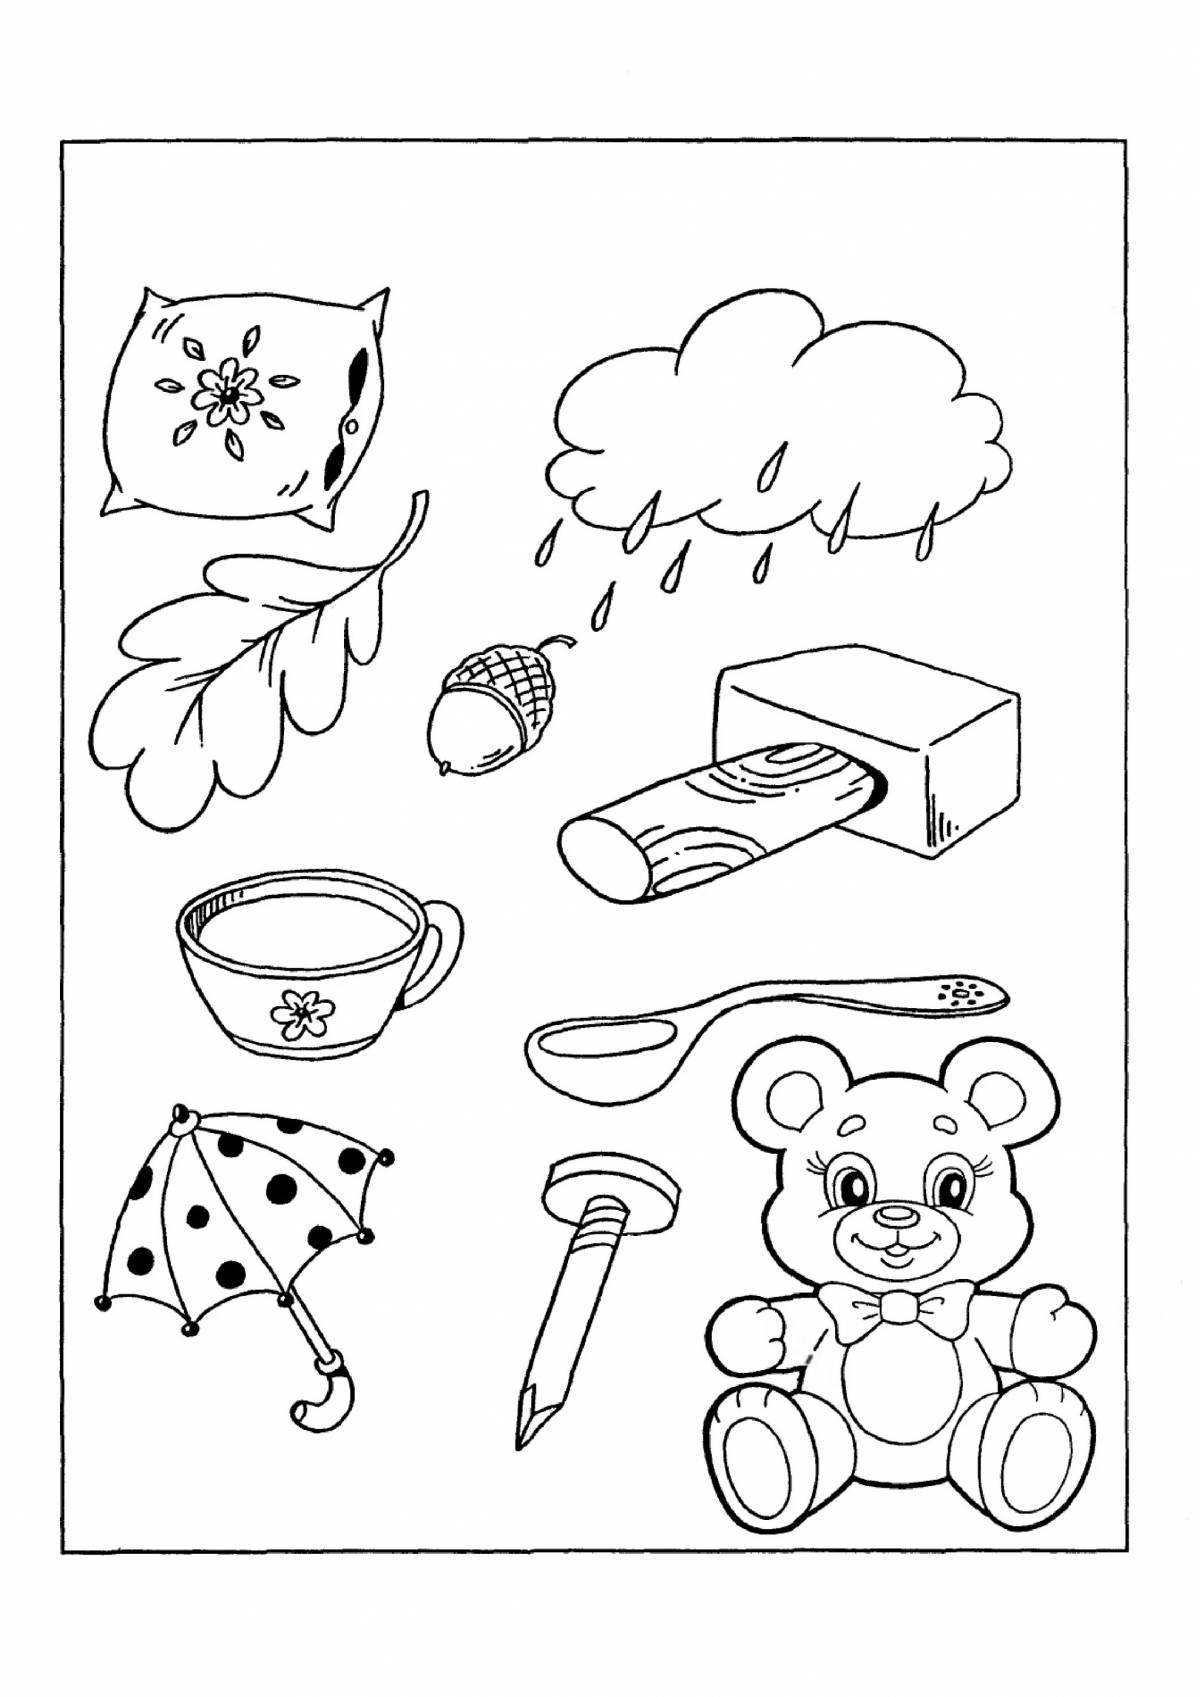 Entertaining coloring book for children logical for 5 years